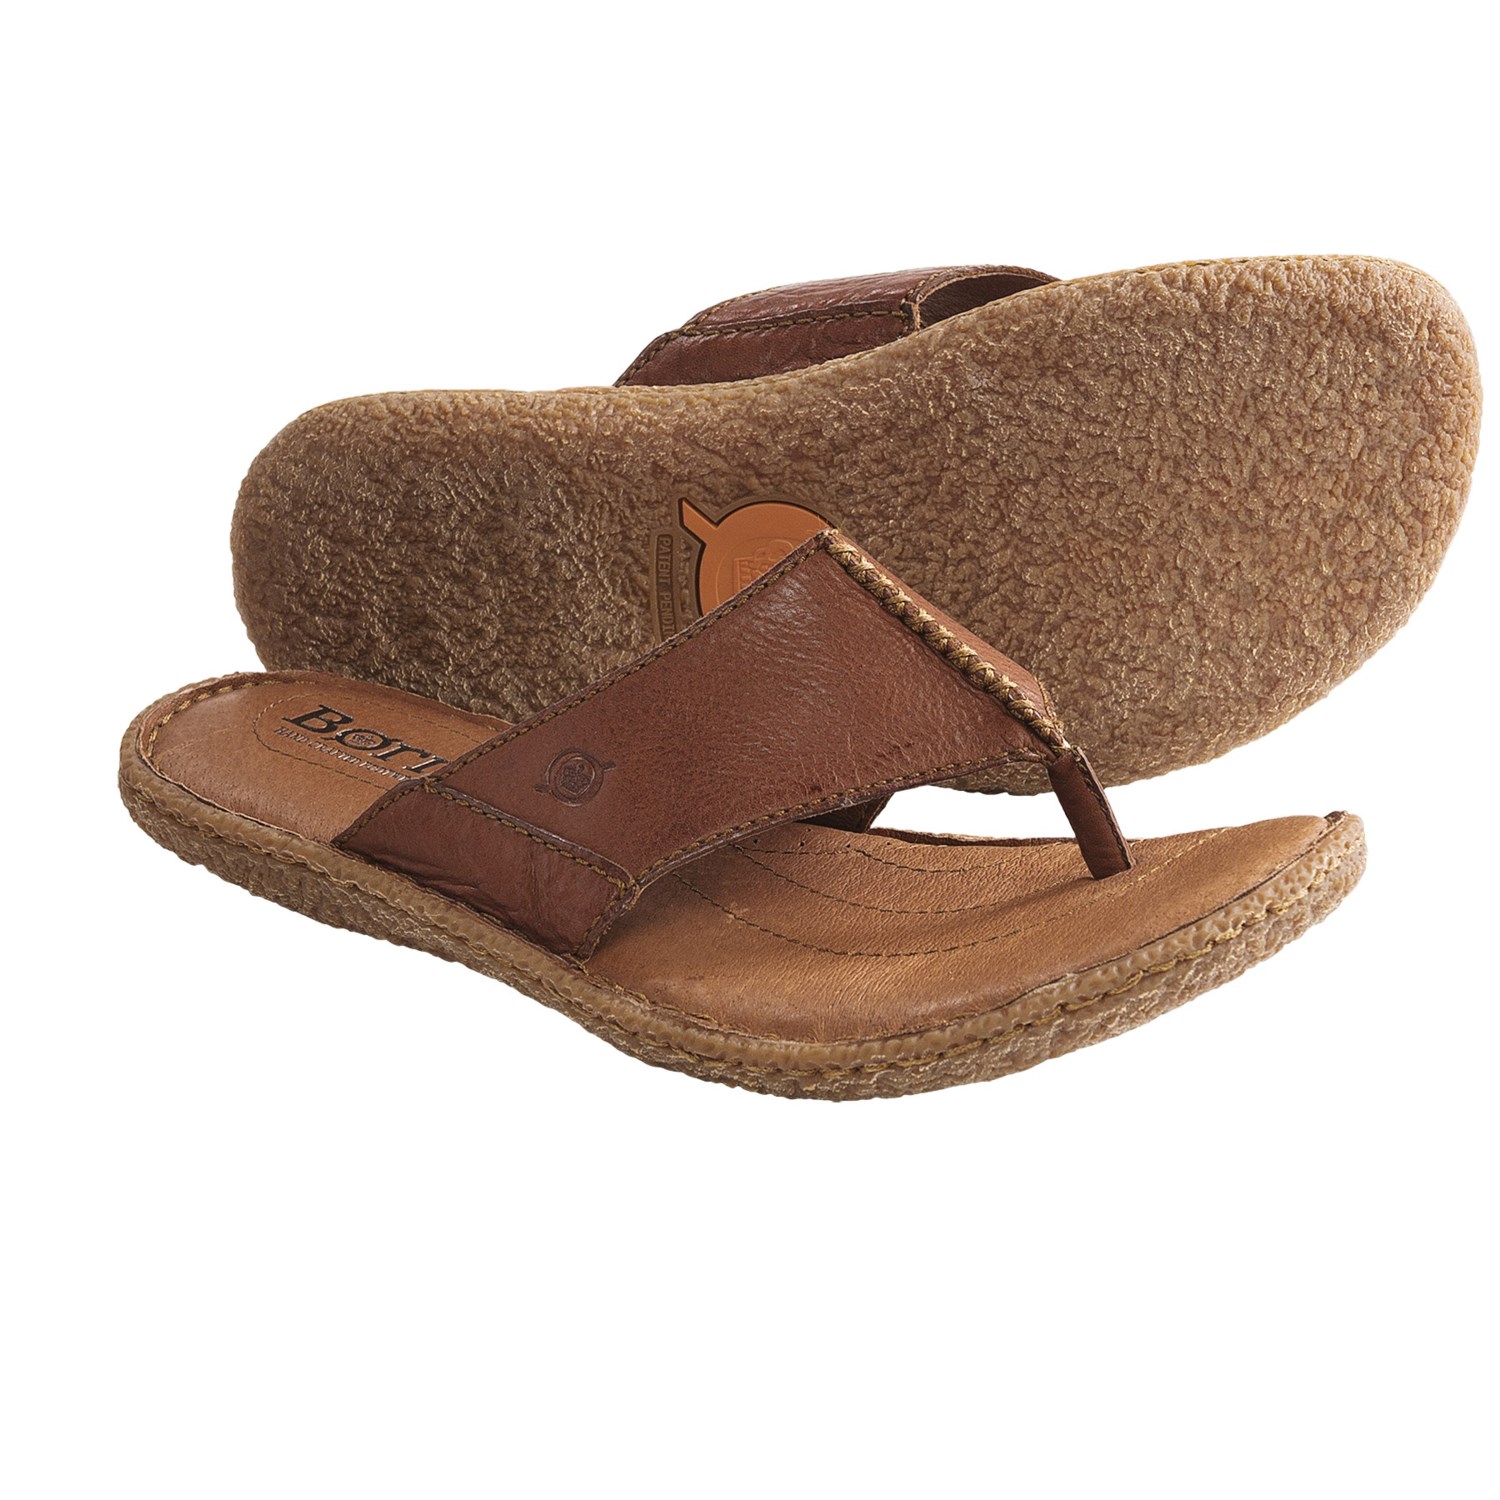 Born Griffith Thong Sandals (For Men) in Cymbal Full Grain